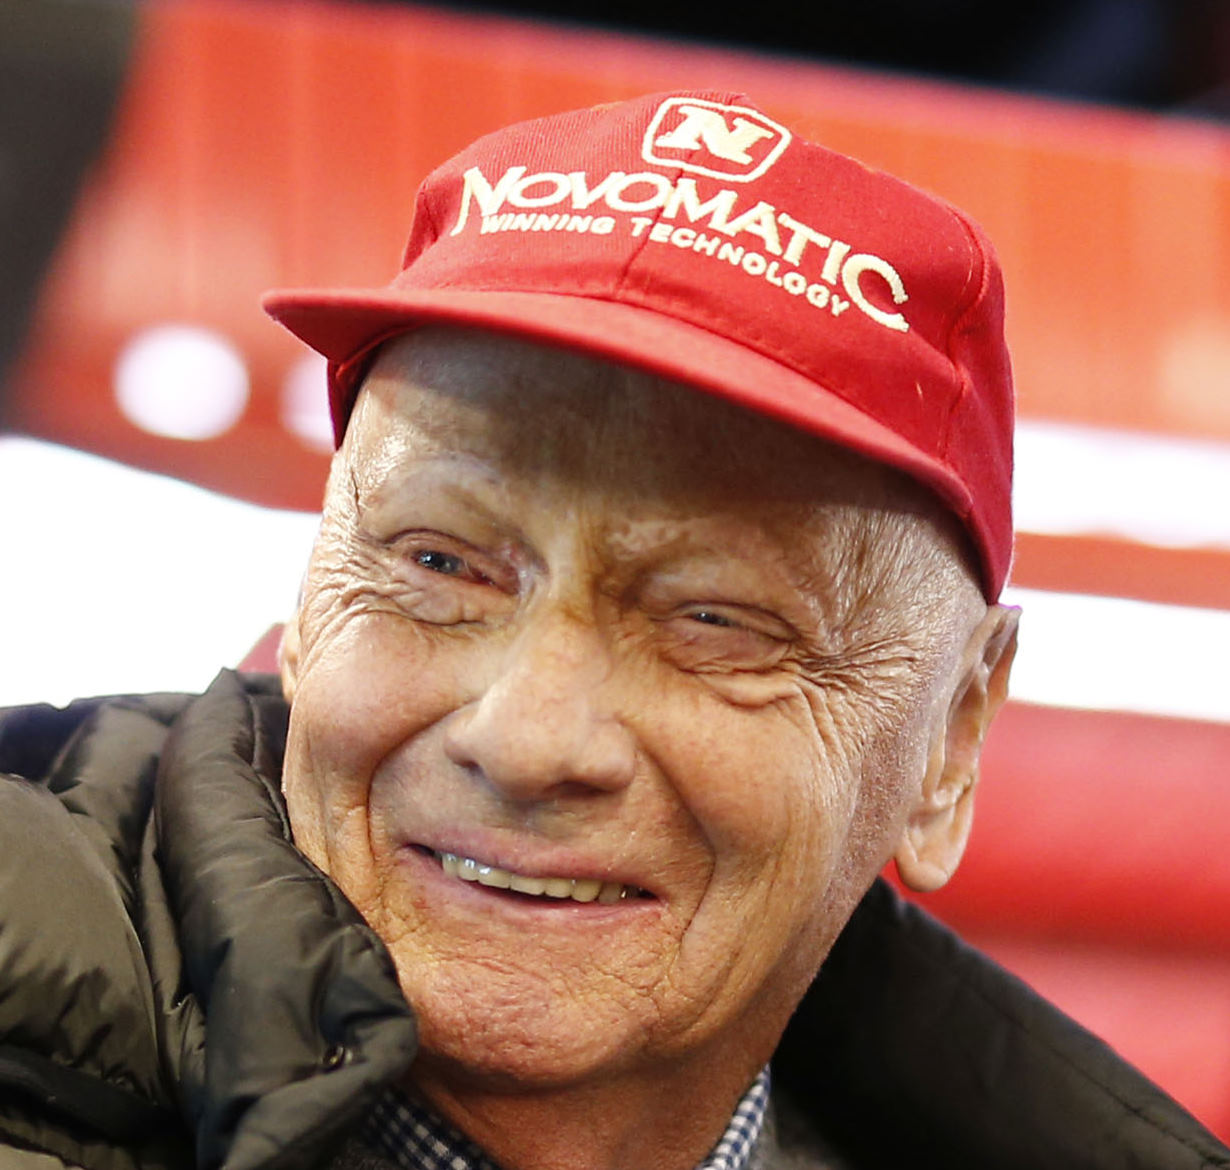 Niki Lauda knows Ferrari's only wins will be when Mercedes makes errors